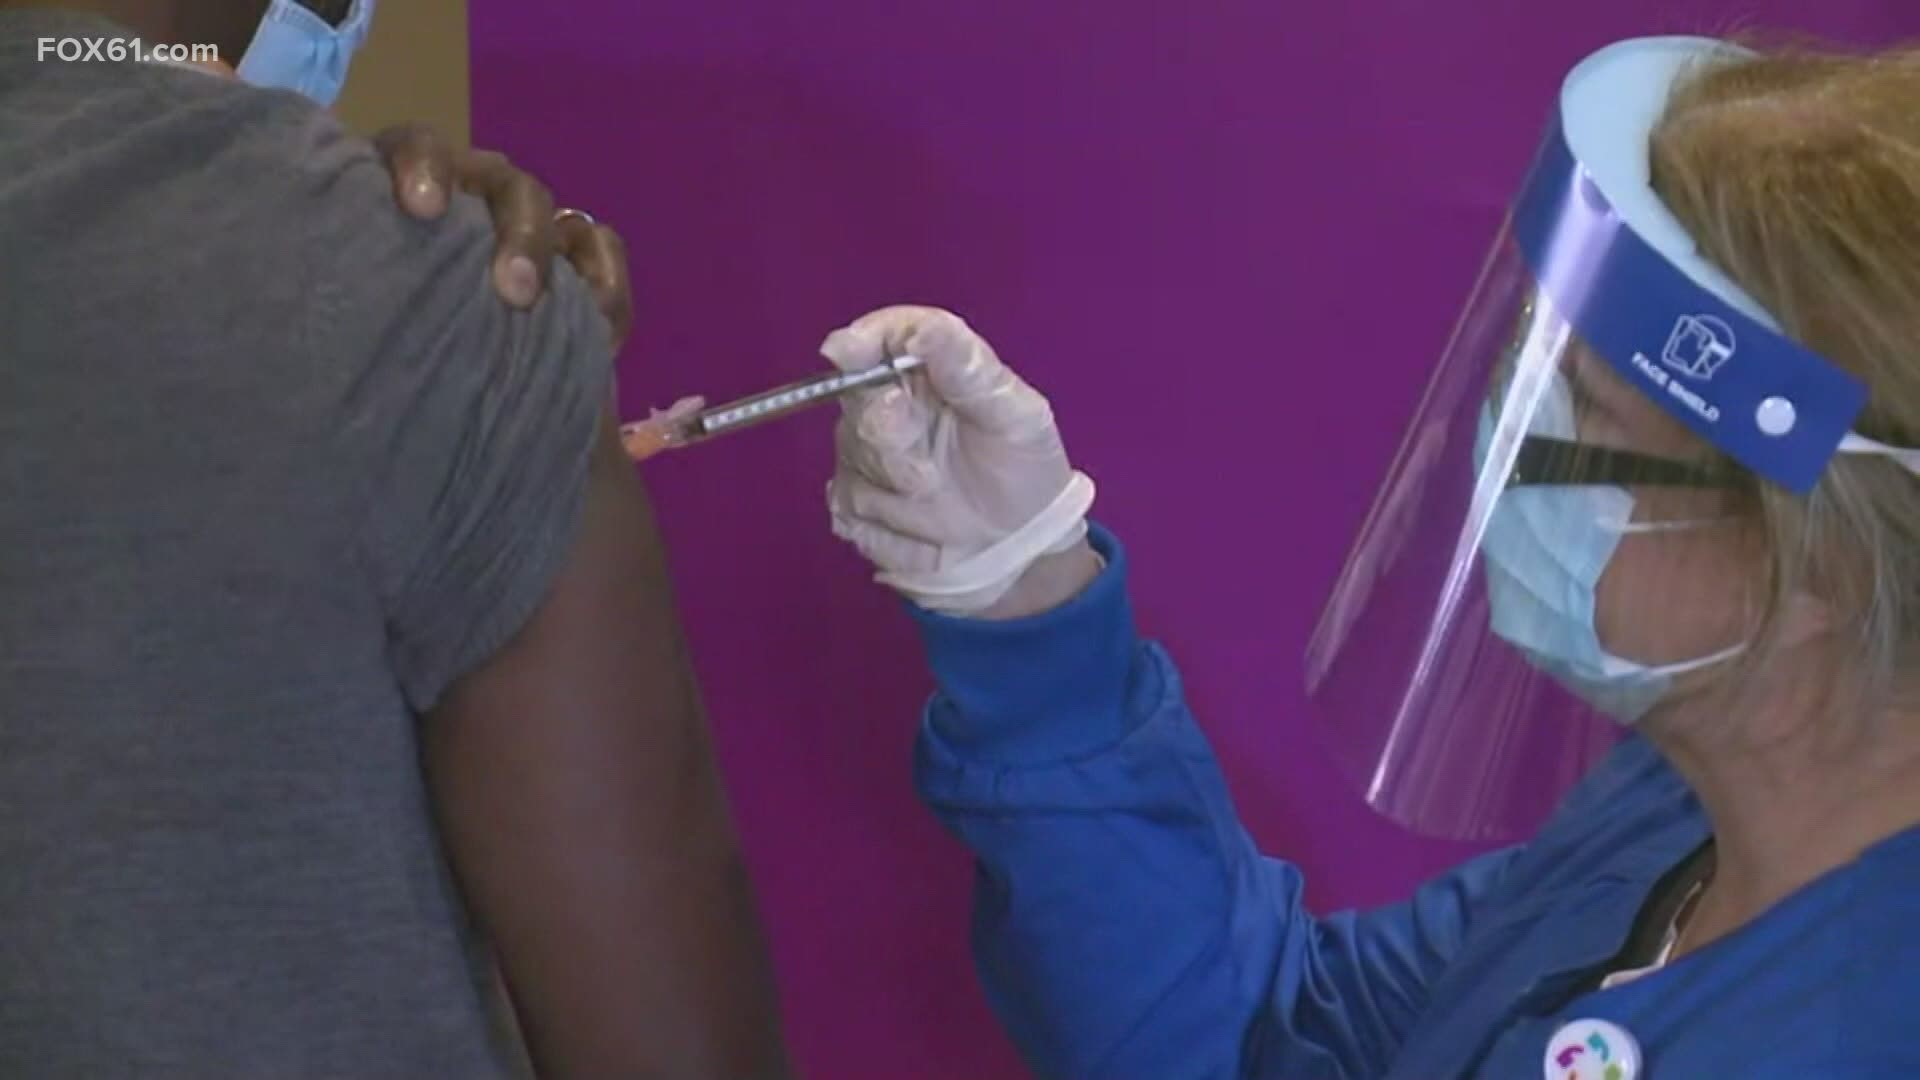 Local healthcare providers exploring ways to increase vaccination rates